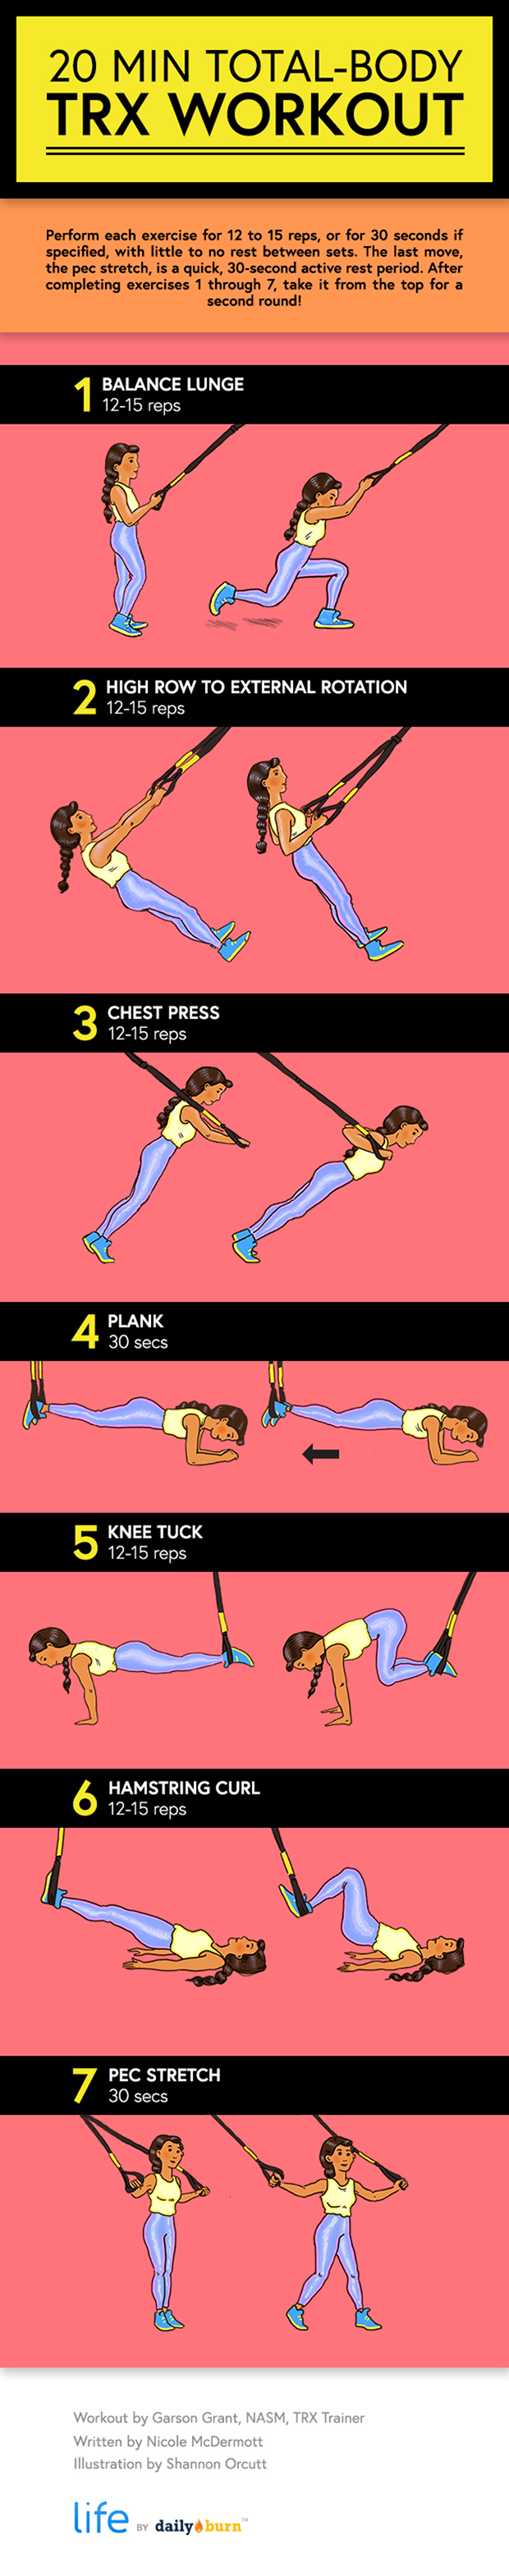 The-Total-Body-TRX-Workout-Infographic